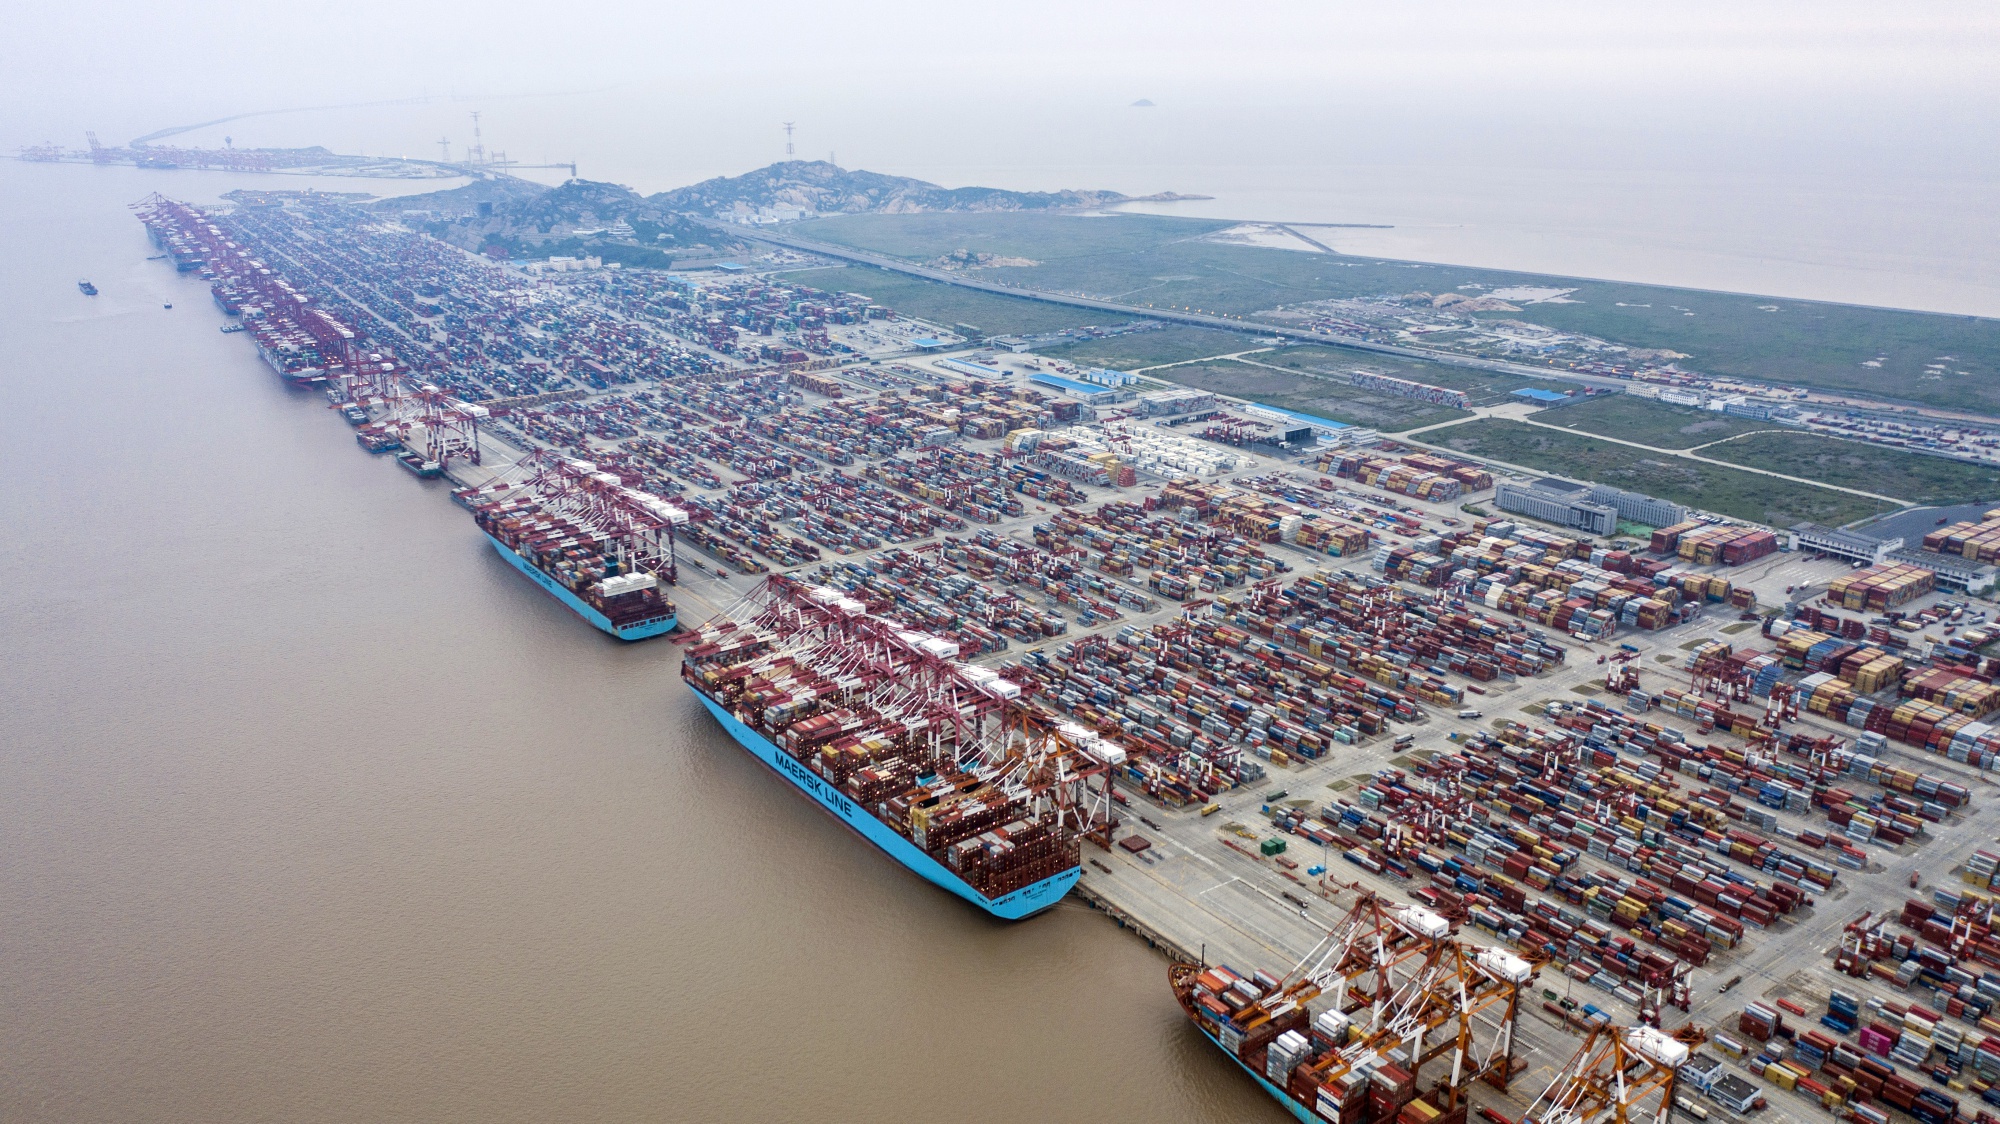 Container ships are docked next to gantry cranes as shipping containers sit stacked at the Yangshan Deepwater Port, operated by Shanghai International Port Group Co. (SIPG), in this aerial photograph taken in Shanghai. Photographer: Qilai Shen/Bloomberg